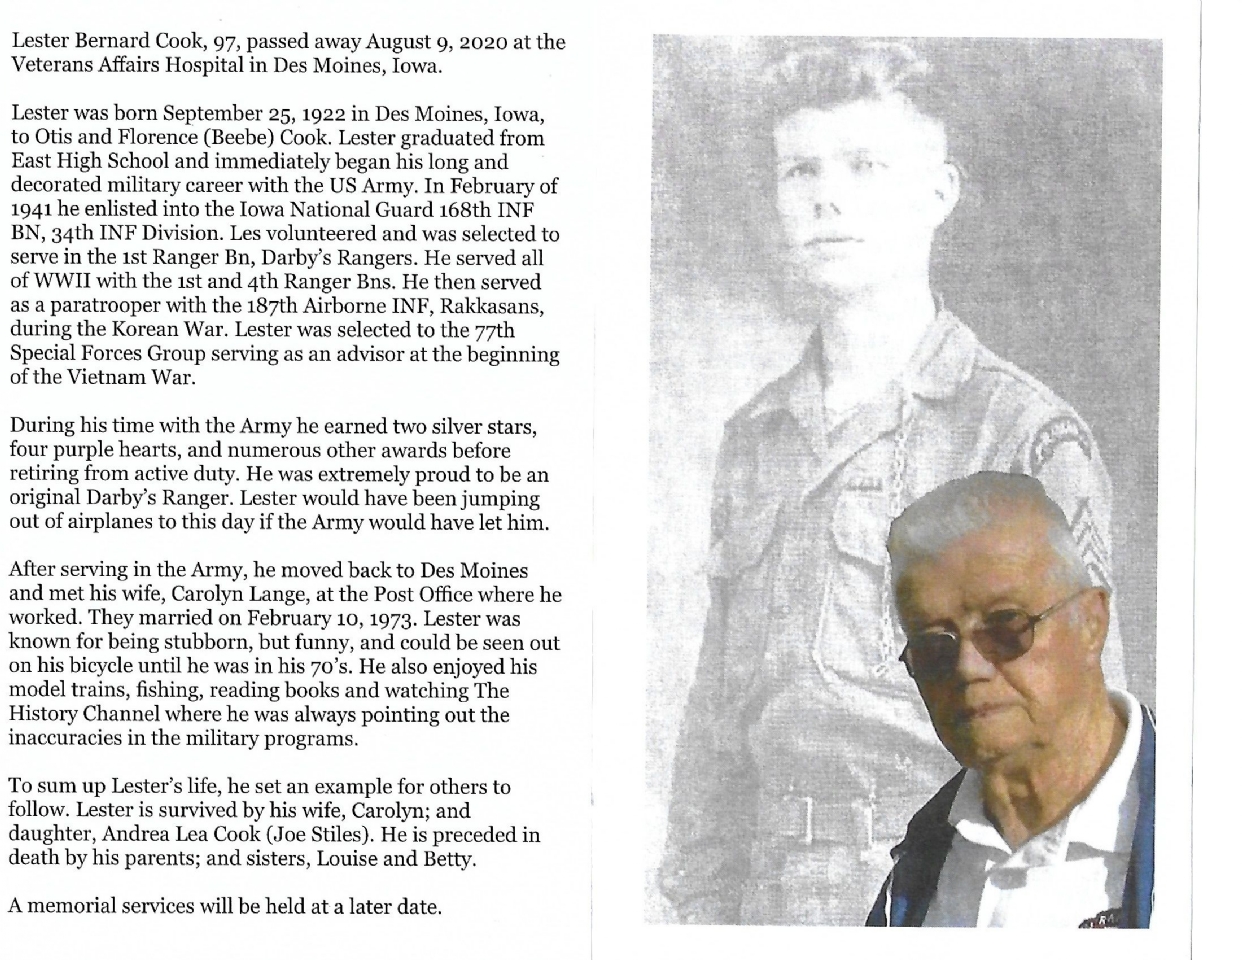 On Tuesday, Sept 1st, there will be a committal service for Lester Bernard Cook, a WWII and Korean War veteran who served as a member of the original force of Darby’s Rangers, and who was awarded two Silver Stars.  Due to the significance of this unit’s contribution to heroic combat action in WWII, Korea, Vietnam, Grenada, Panama, Somalia, Afghanistan, Iraq, and Syria to include scaling the cliffs during the Normandy invasion, fighting off thousands of Chinese in hand-to-hand combat in Korea, infiltrating deep behind enemy lines in Vietnam/Laos/Cambodia, parachuting into Grenada, Panama, and Afghanistan into the heart of enemy held bases under withering fire to initiate the following invasion of American forces, I am requesting an all-hands on deck event in support of this veteran’s service due to the historical significance of this military unit.